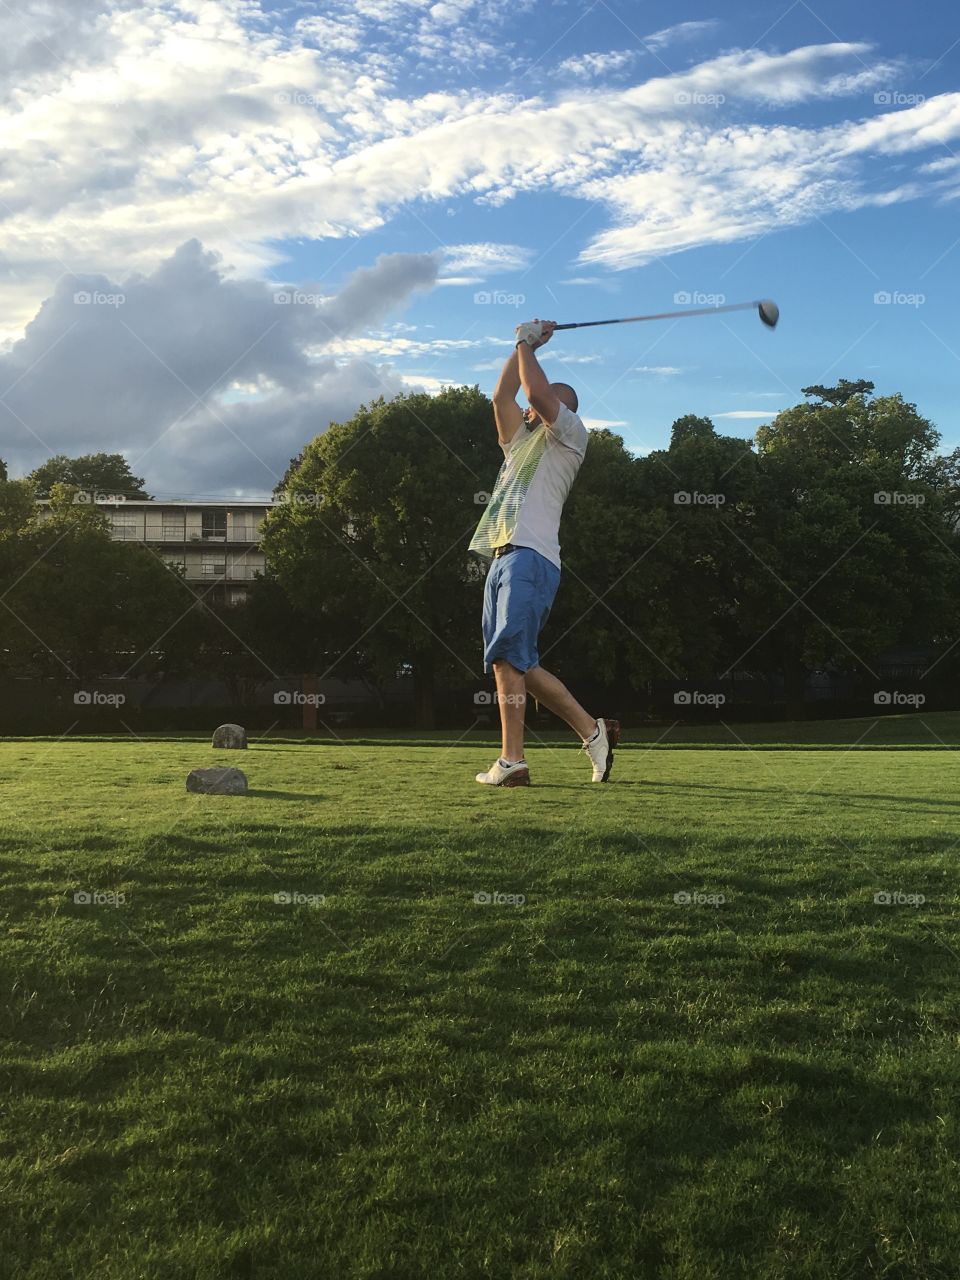 Swing completion
